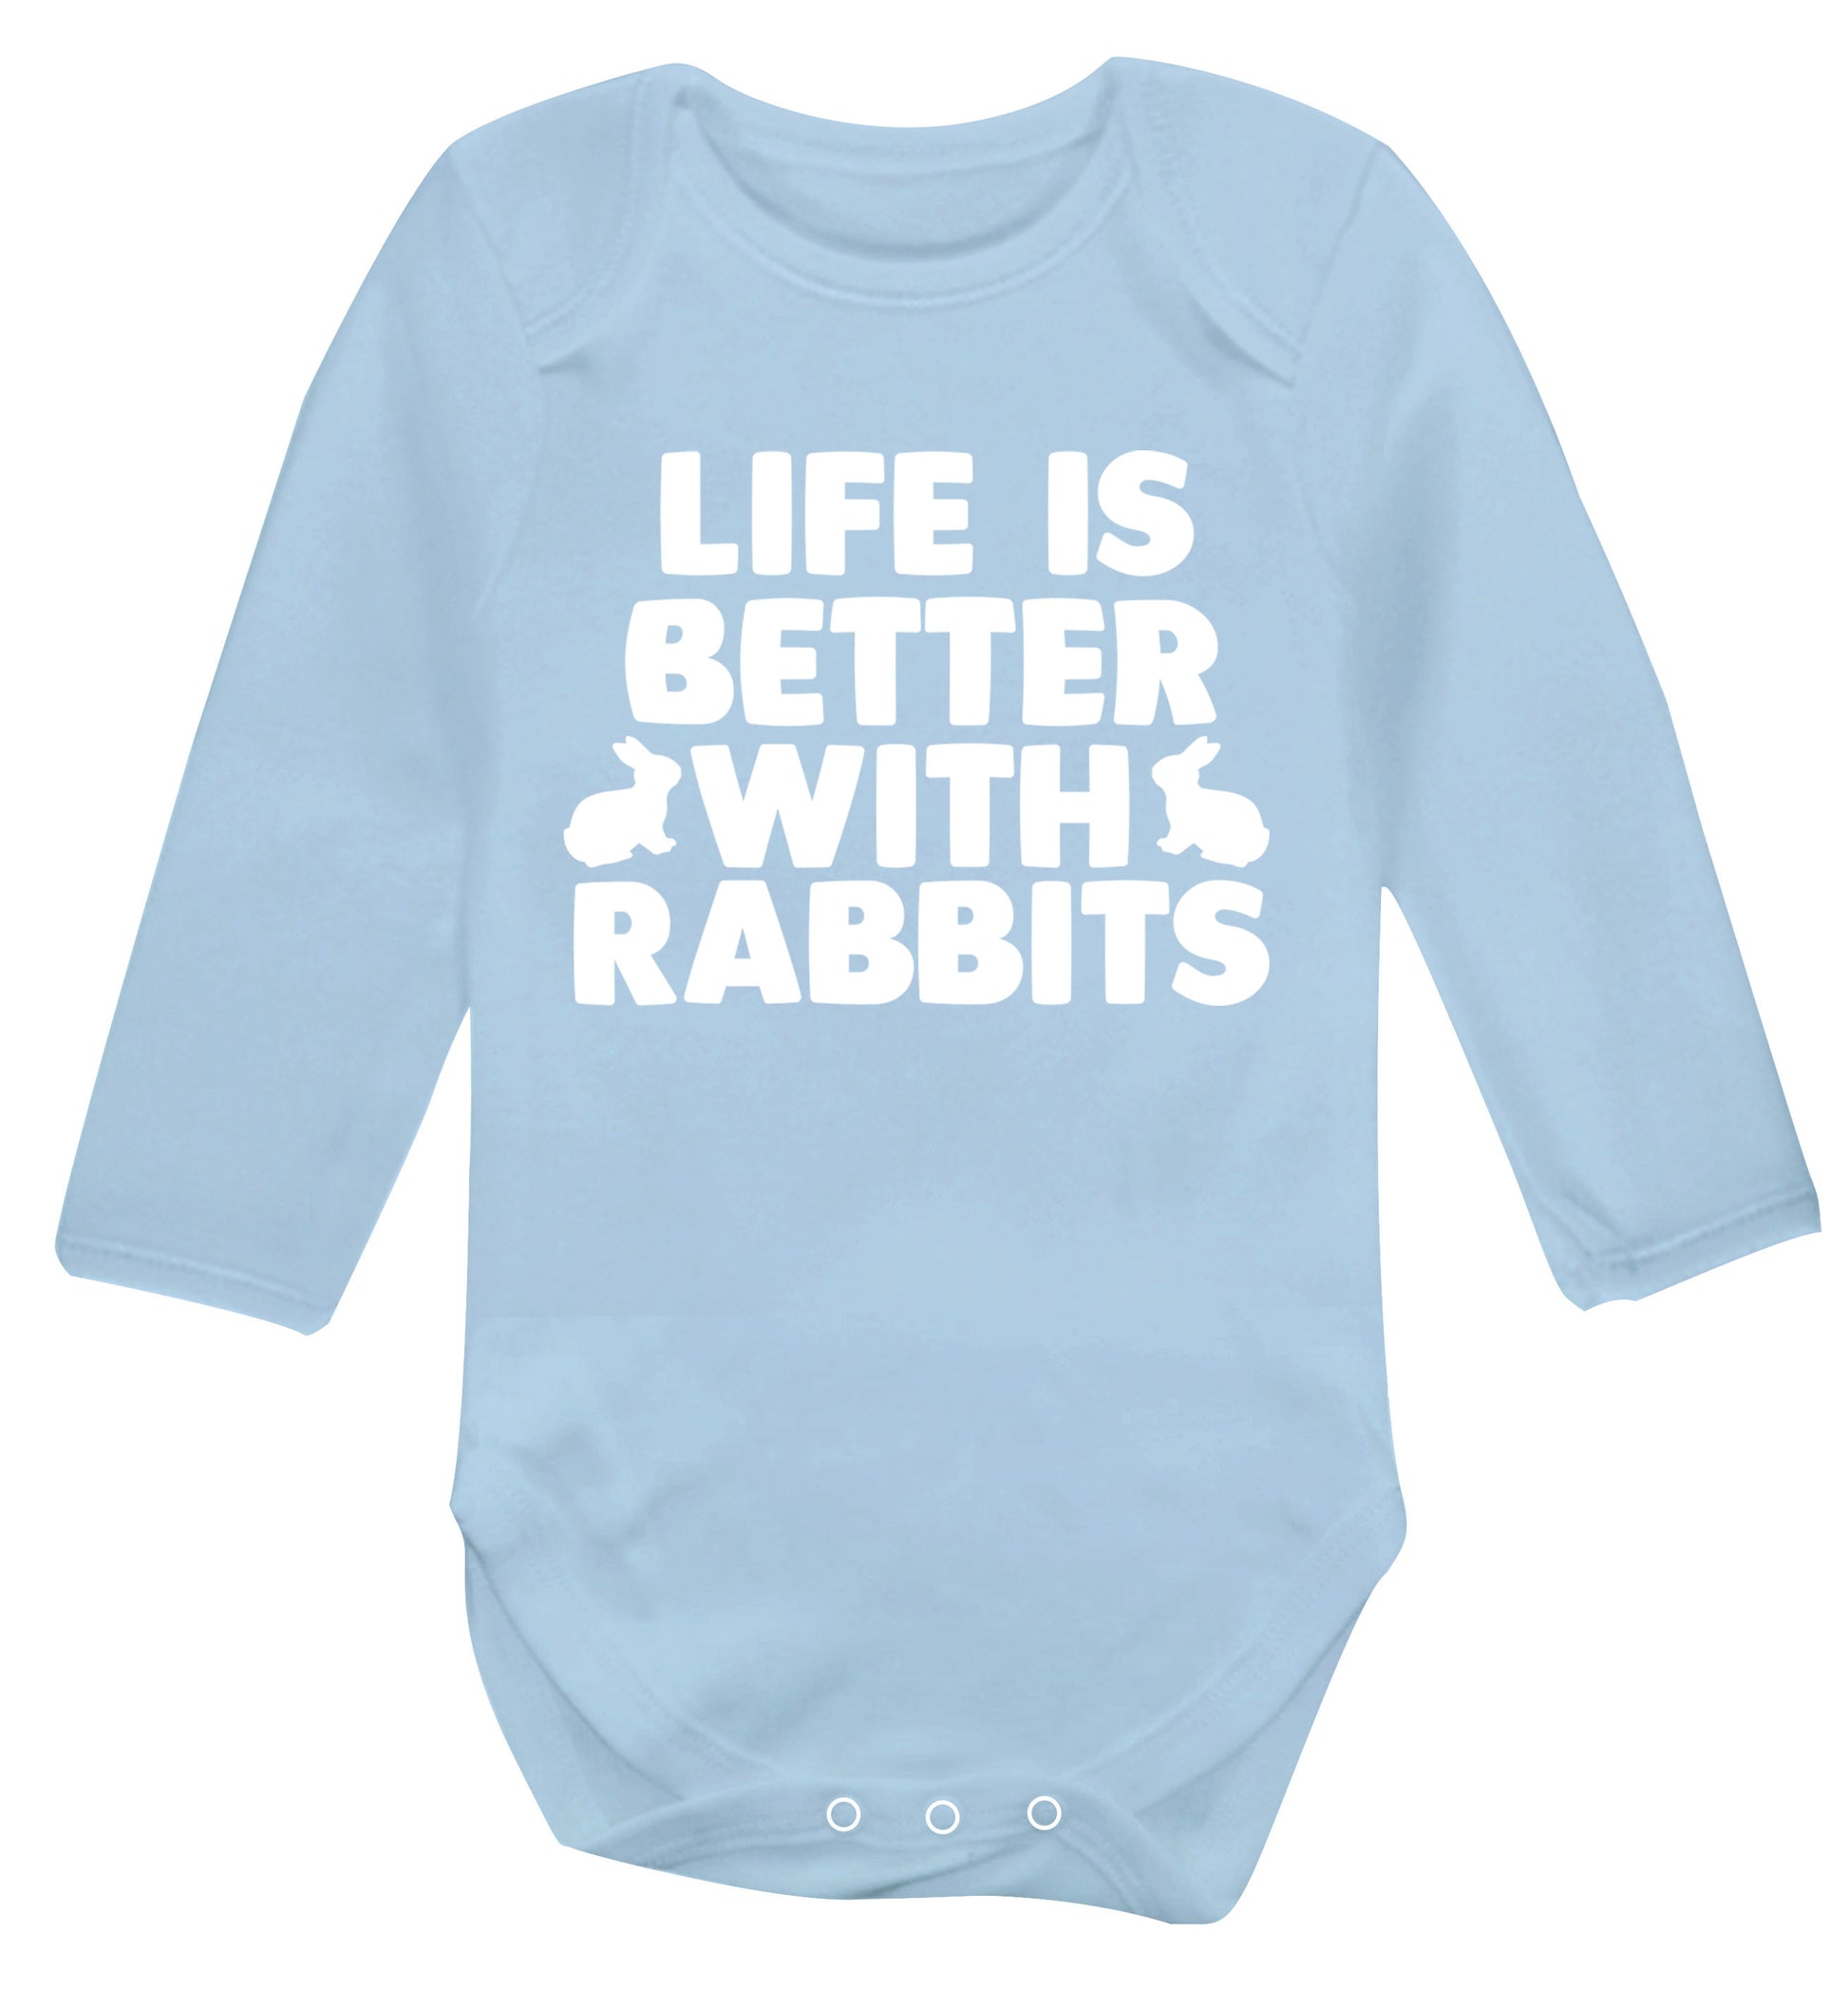 Life is better with rabbits Baby Vest long sleeved pale blue 6-12 months